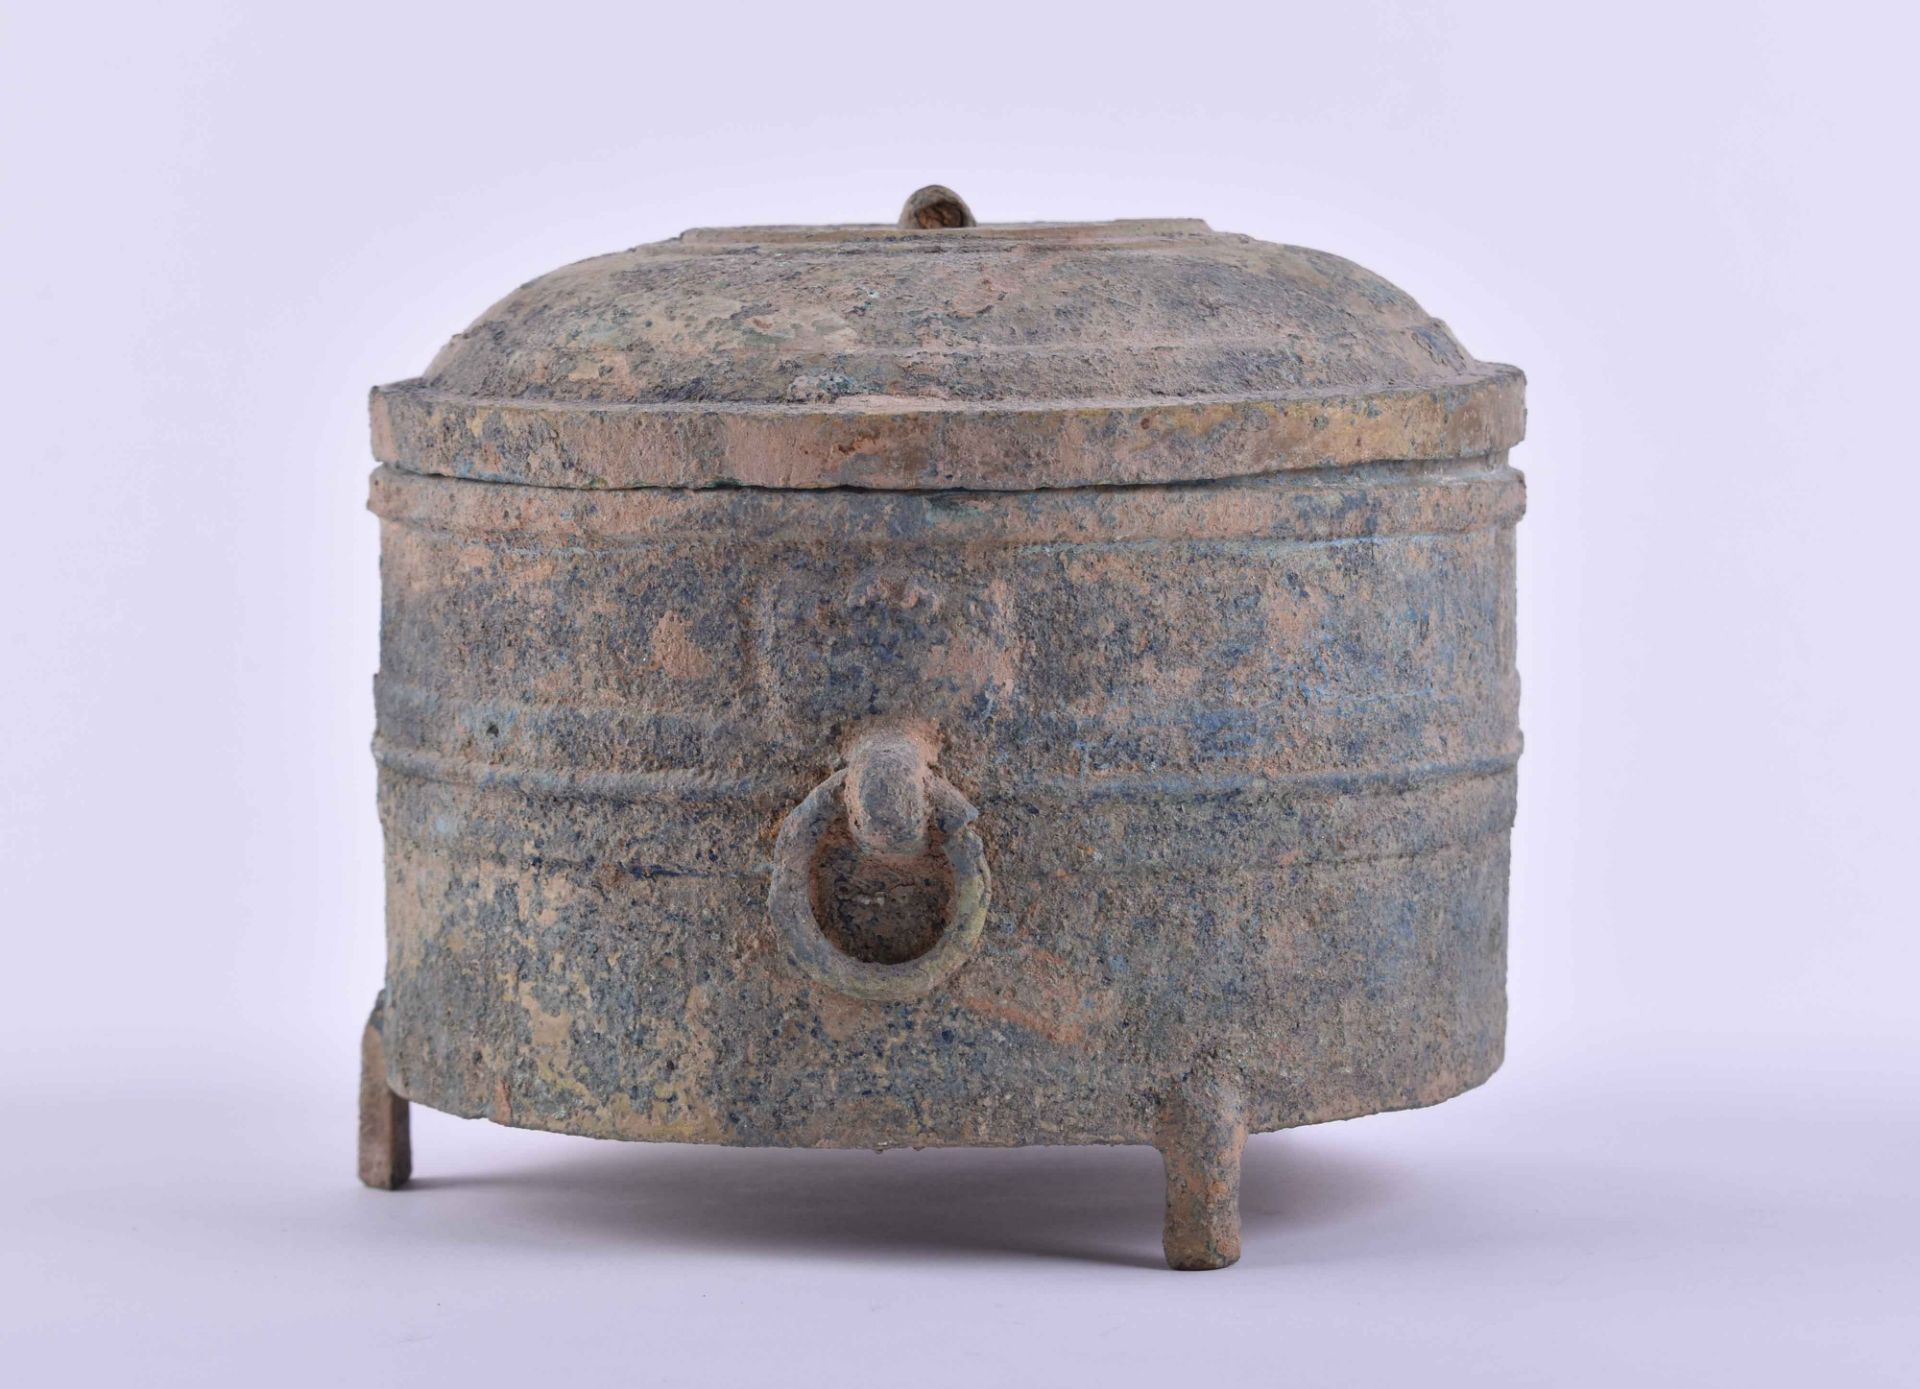  Lid vessel China Han dynasty - Image 2 of 6